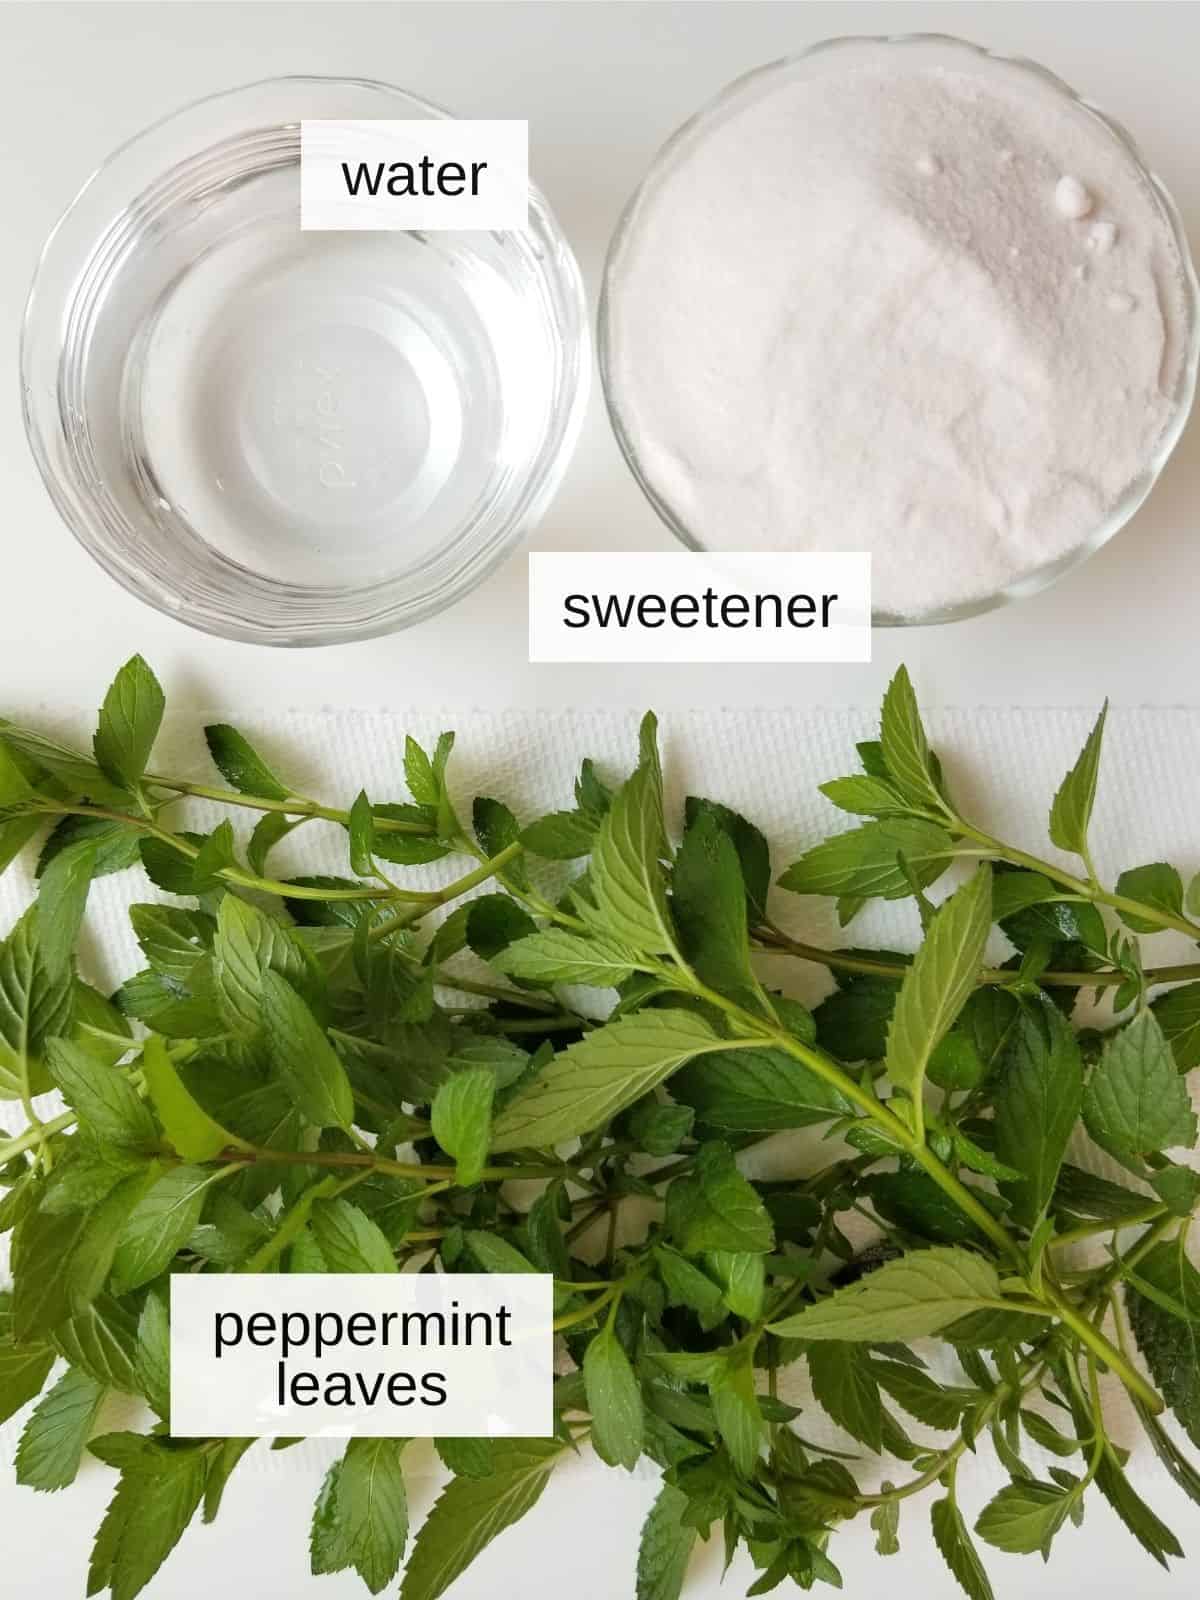 ingredients for peppermint syrup, including water, sweetener, and fresh peppermint leaves.